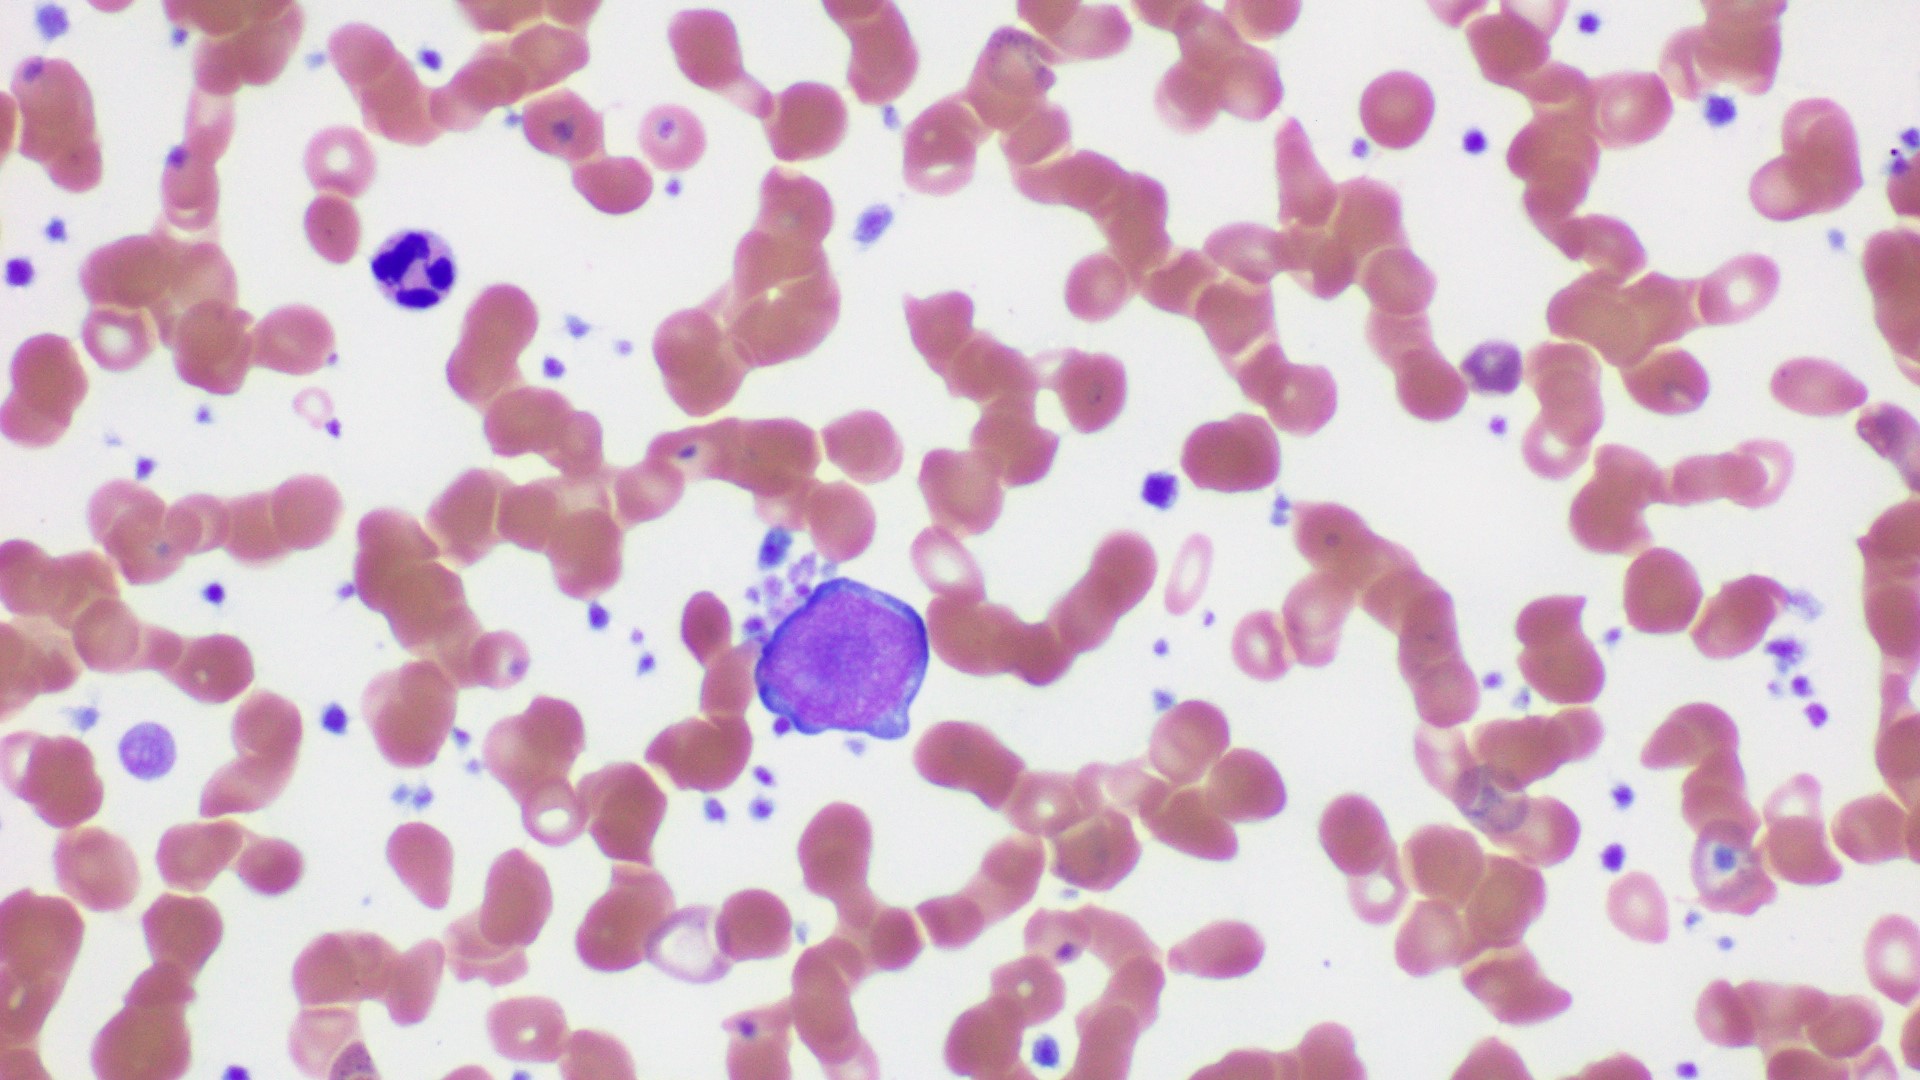 A hematoxylin and eosin (H&E) stained slide showing platelet clumping around a neutrophil. 